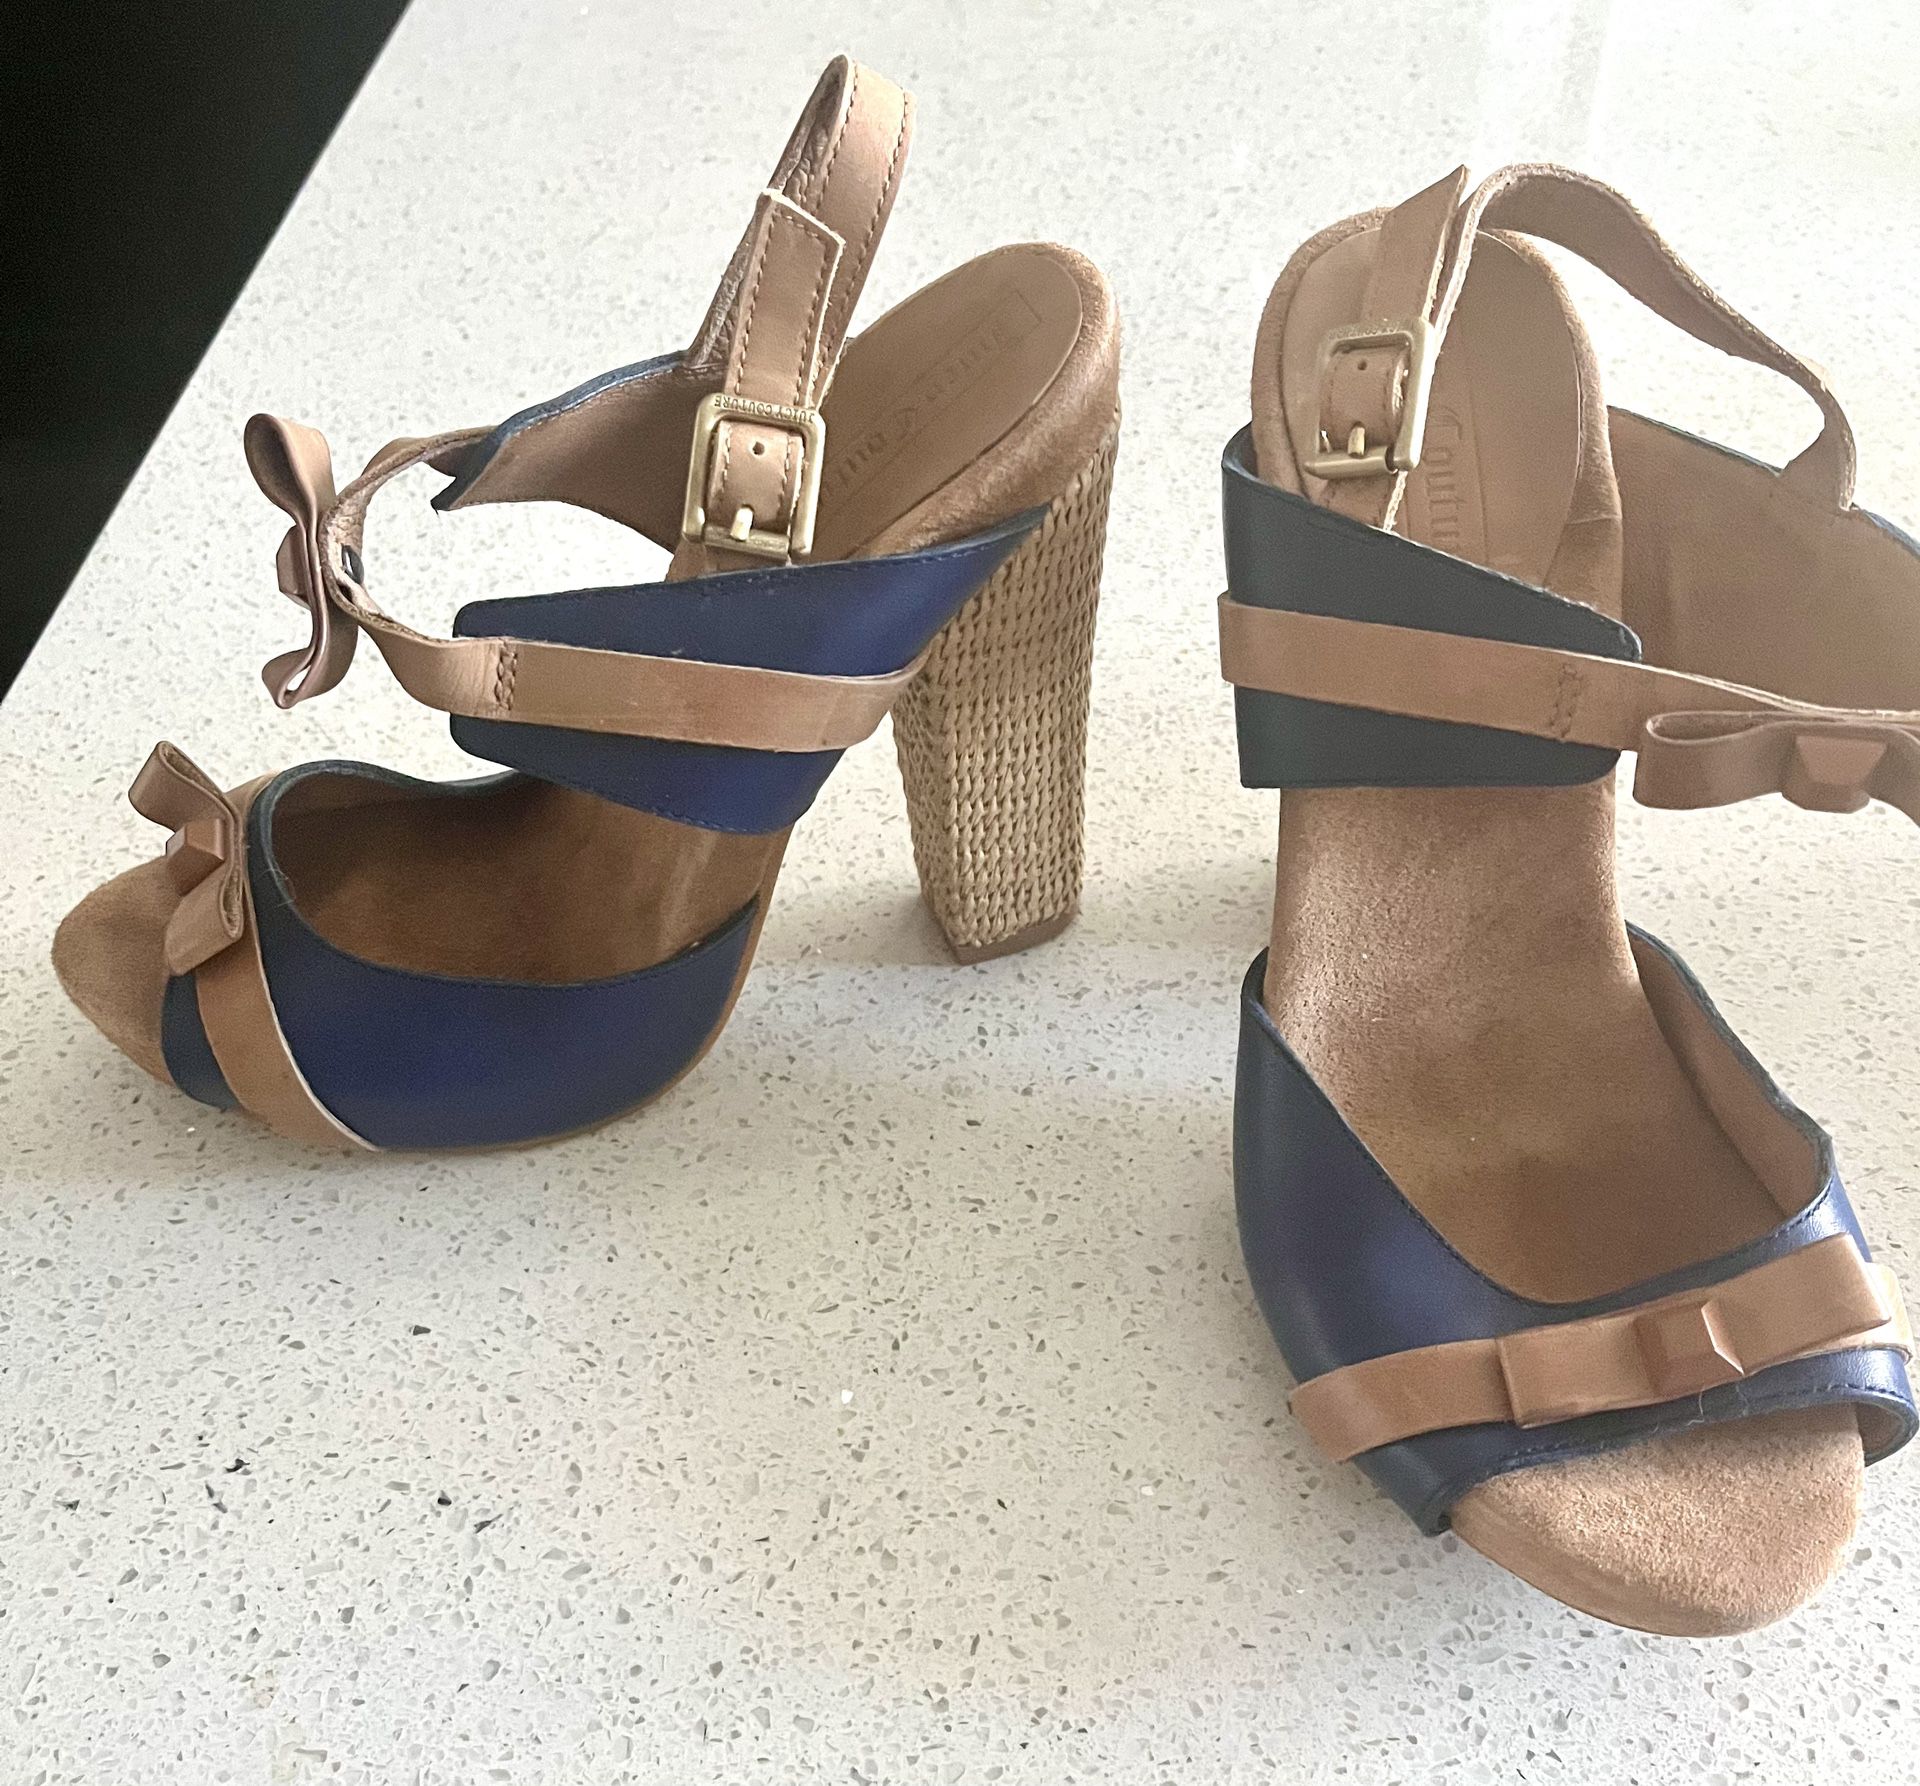 Juicy Couture Navy Raffia & leather Heels 6.5